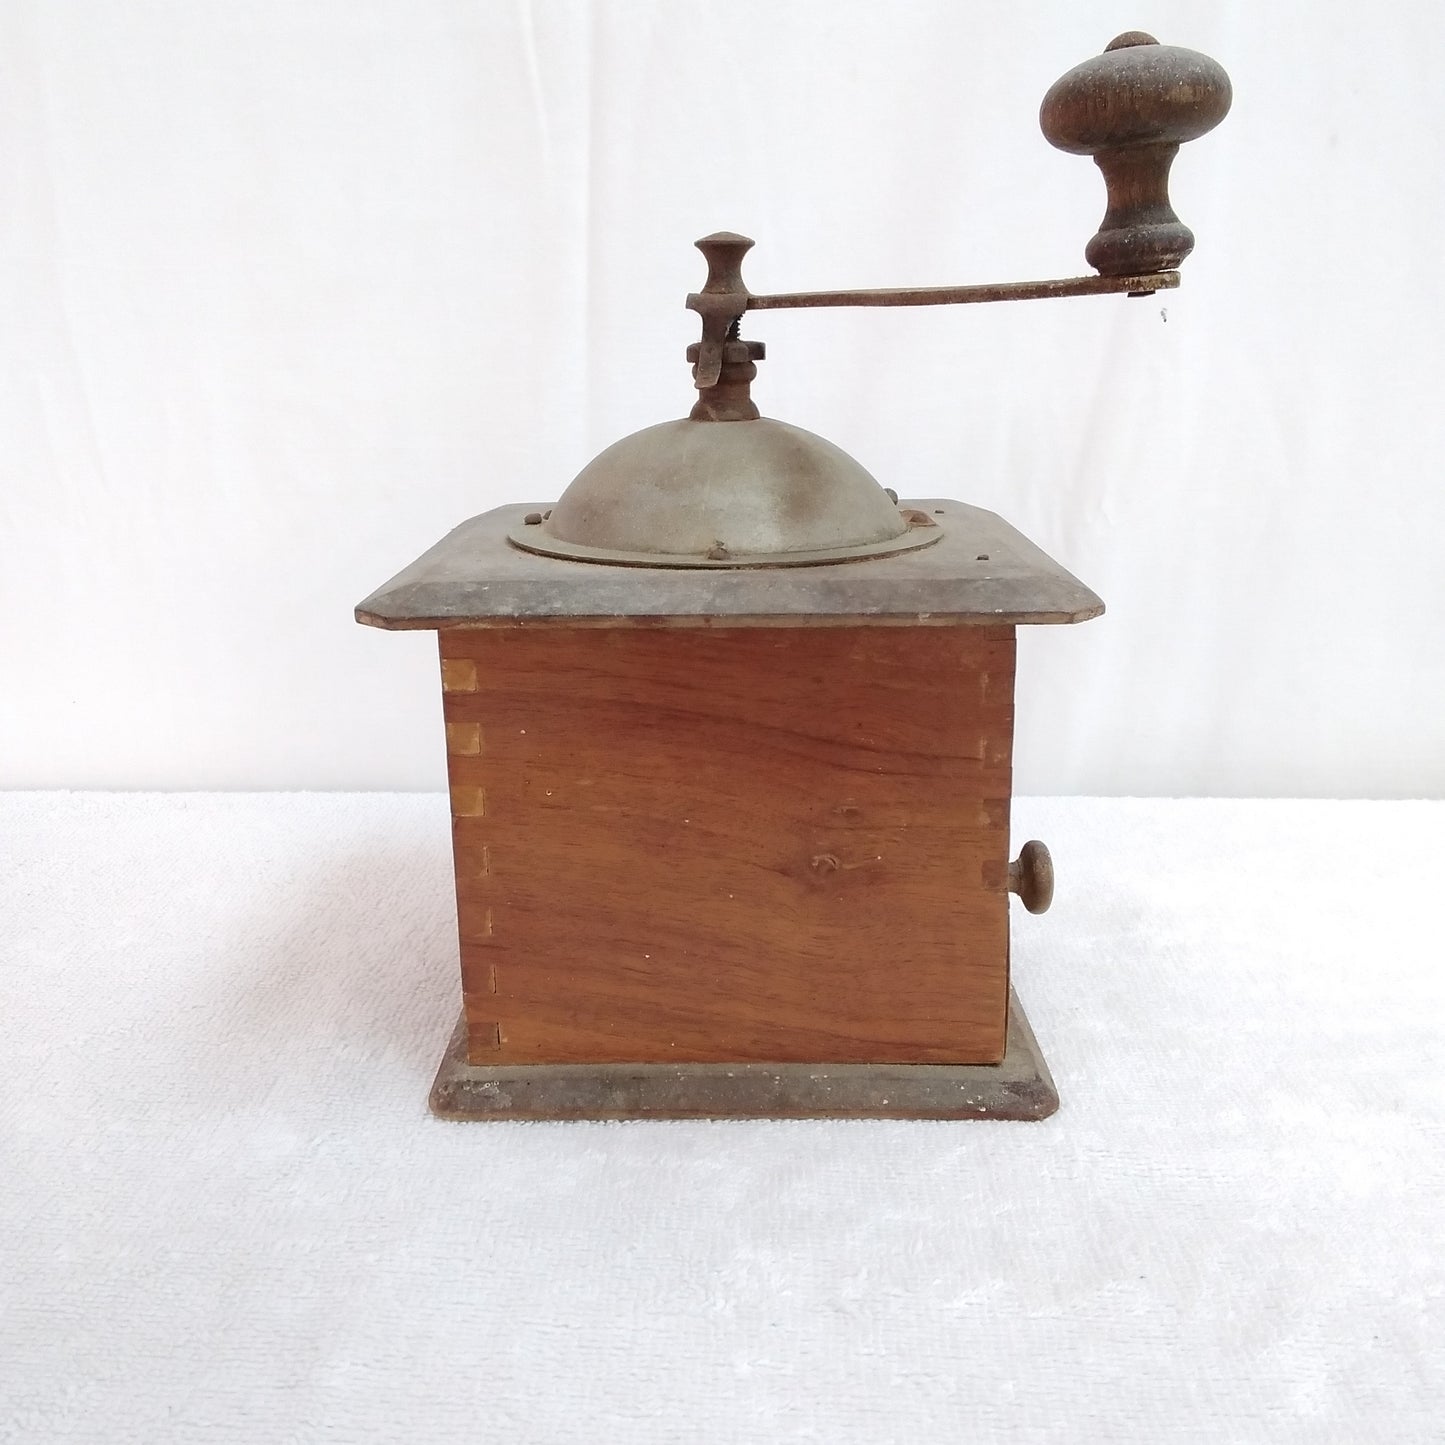 ANTIQUE -- Peugeot Freres Valentigney Coffee Mill -- early 20th c, before 1940